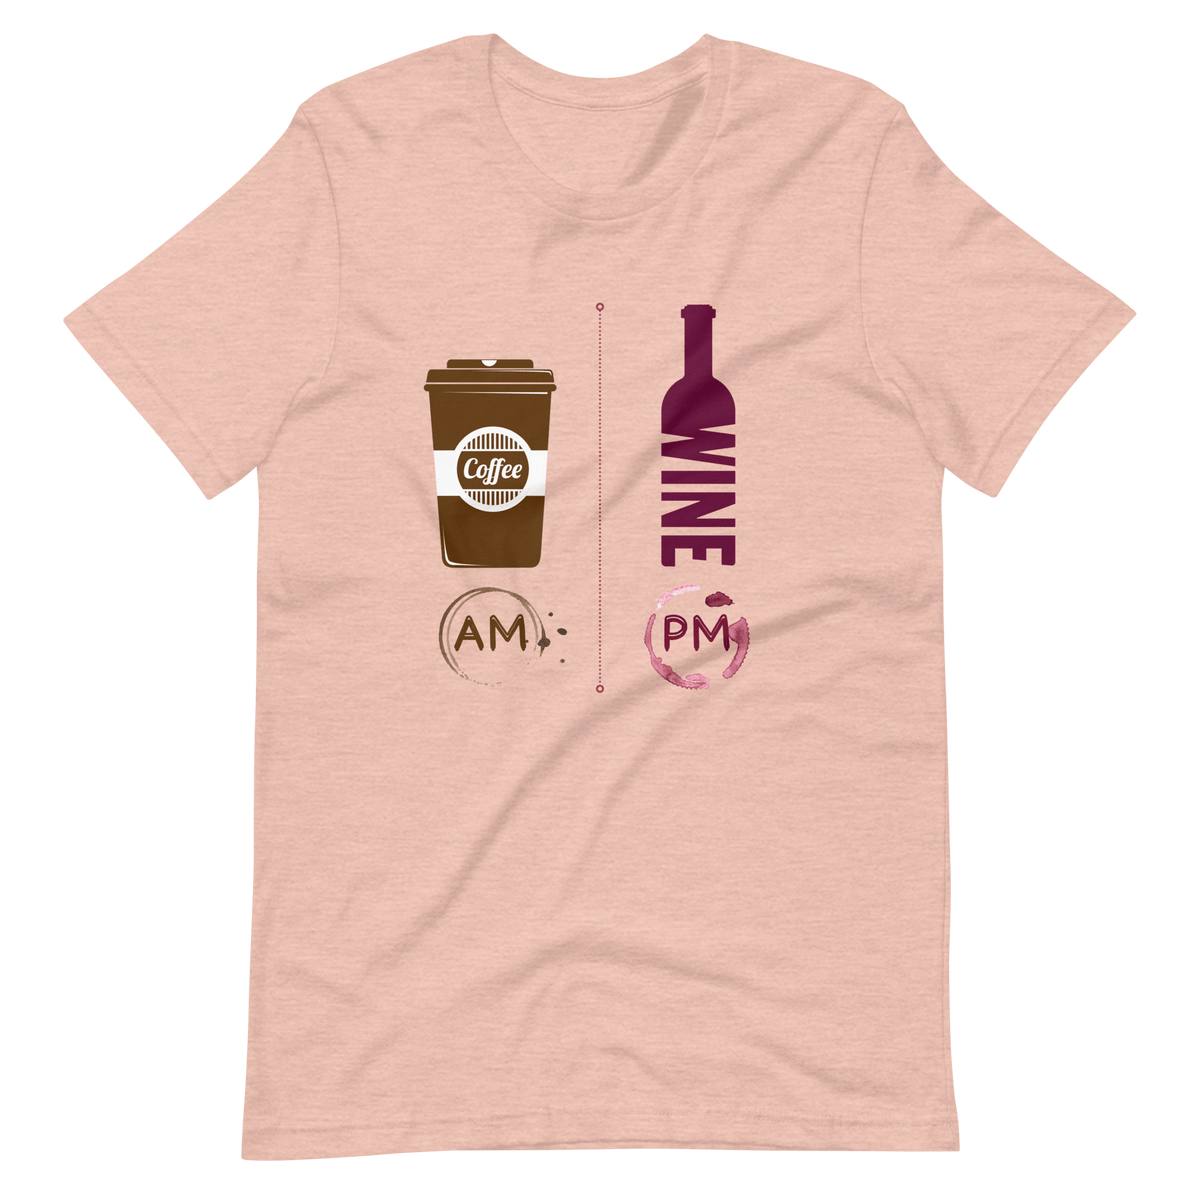 Coffee AM Wine PM, Wine Shirt, Wine Lover Shirt, Coffee T-Shirt, Workout Shirt, Gift for Friend, Funny, Party Tees, Wine, Coffee Gift Idea